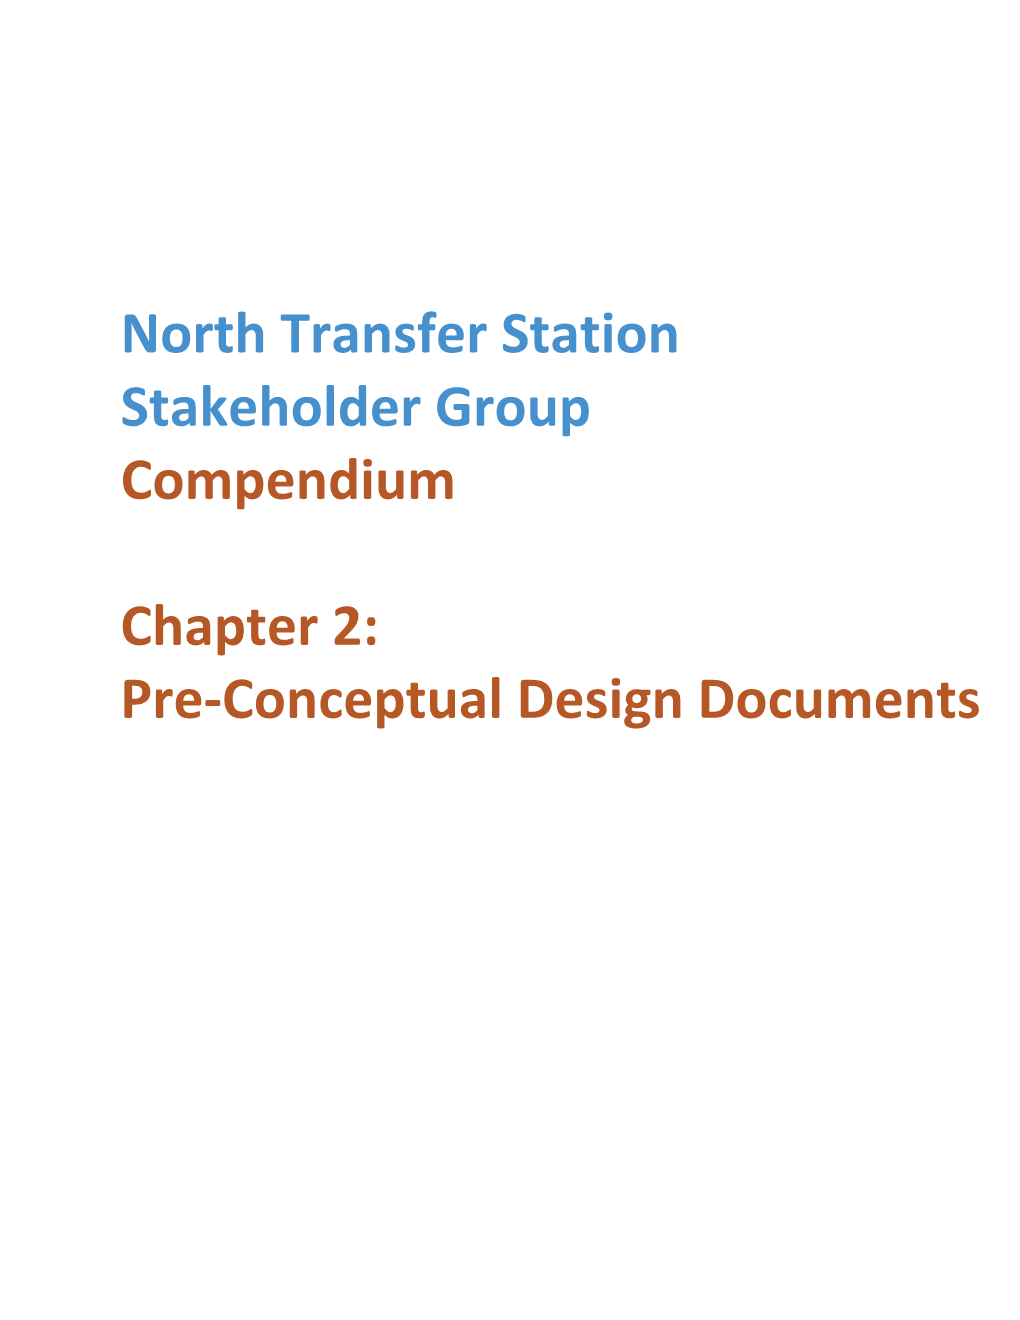 North Transfer Station Stakeholder Group Compendium Chapter 2: Pre-Conceptual Design Documents